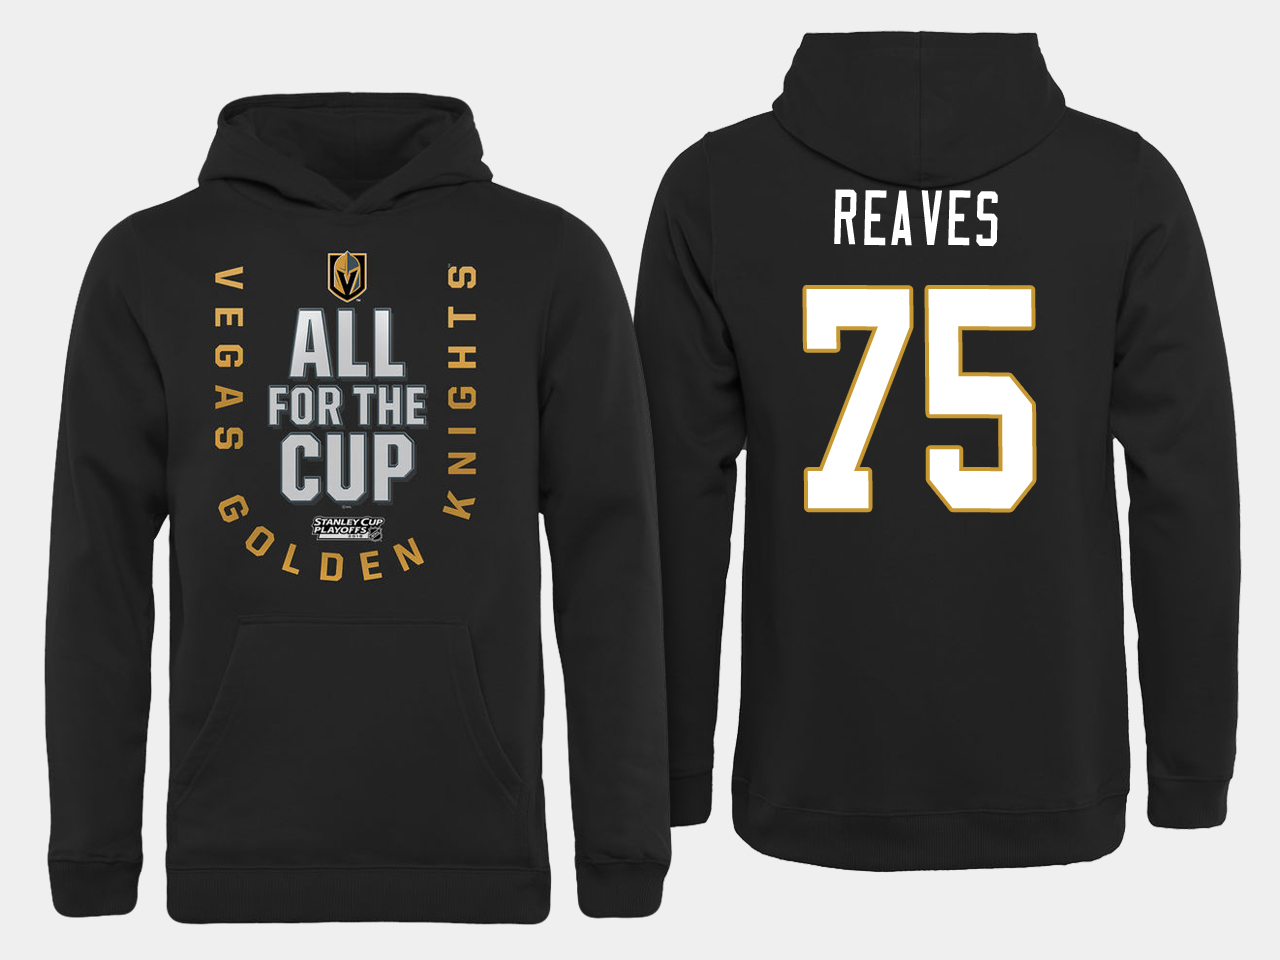 Men NHL Vegas Golden Knights 75 Reaves All for the Cup hoodie